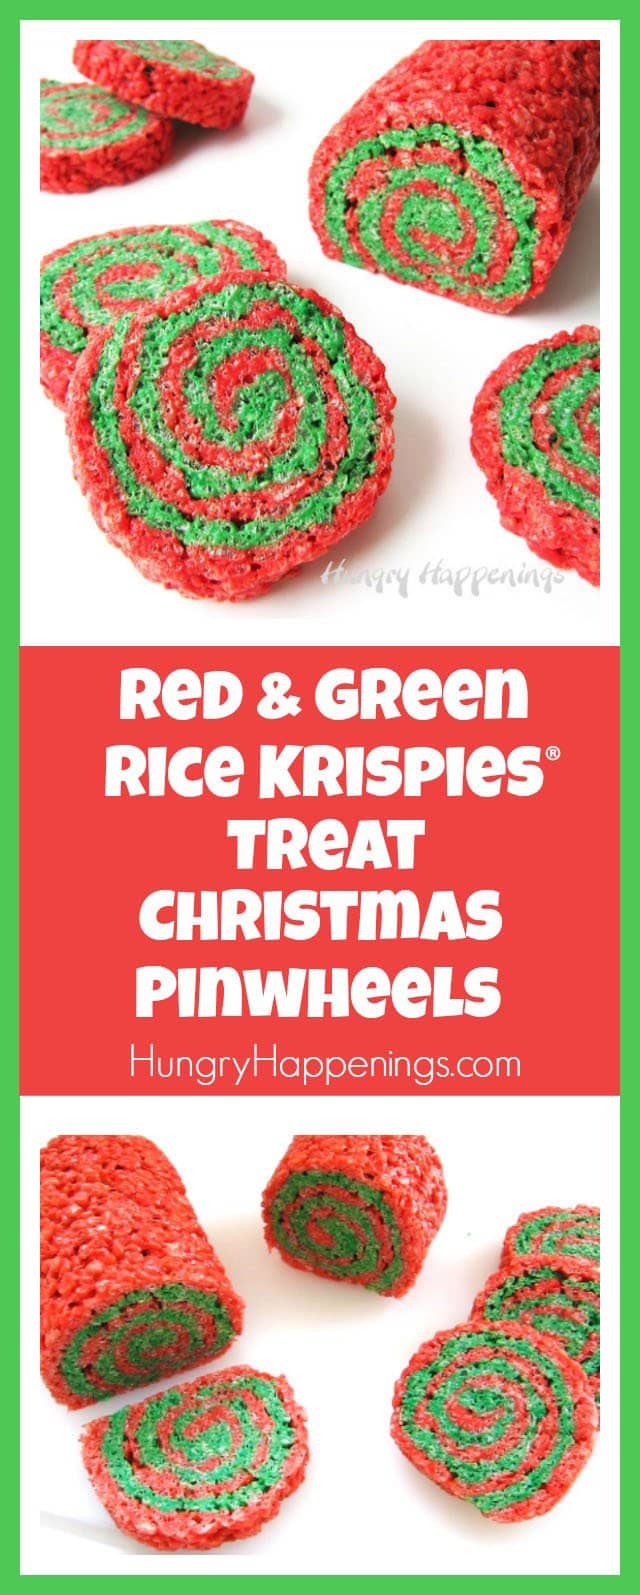 Celebrate the holiday season with some festive Red and Green Rice Krispies Treat Christmas Pinwheels. Layers of colorful marshmallow cereal treats are rolled up and cut to reveal pretty swirls of holiday color.